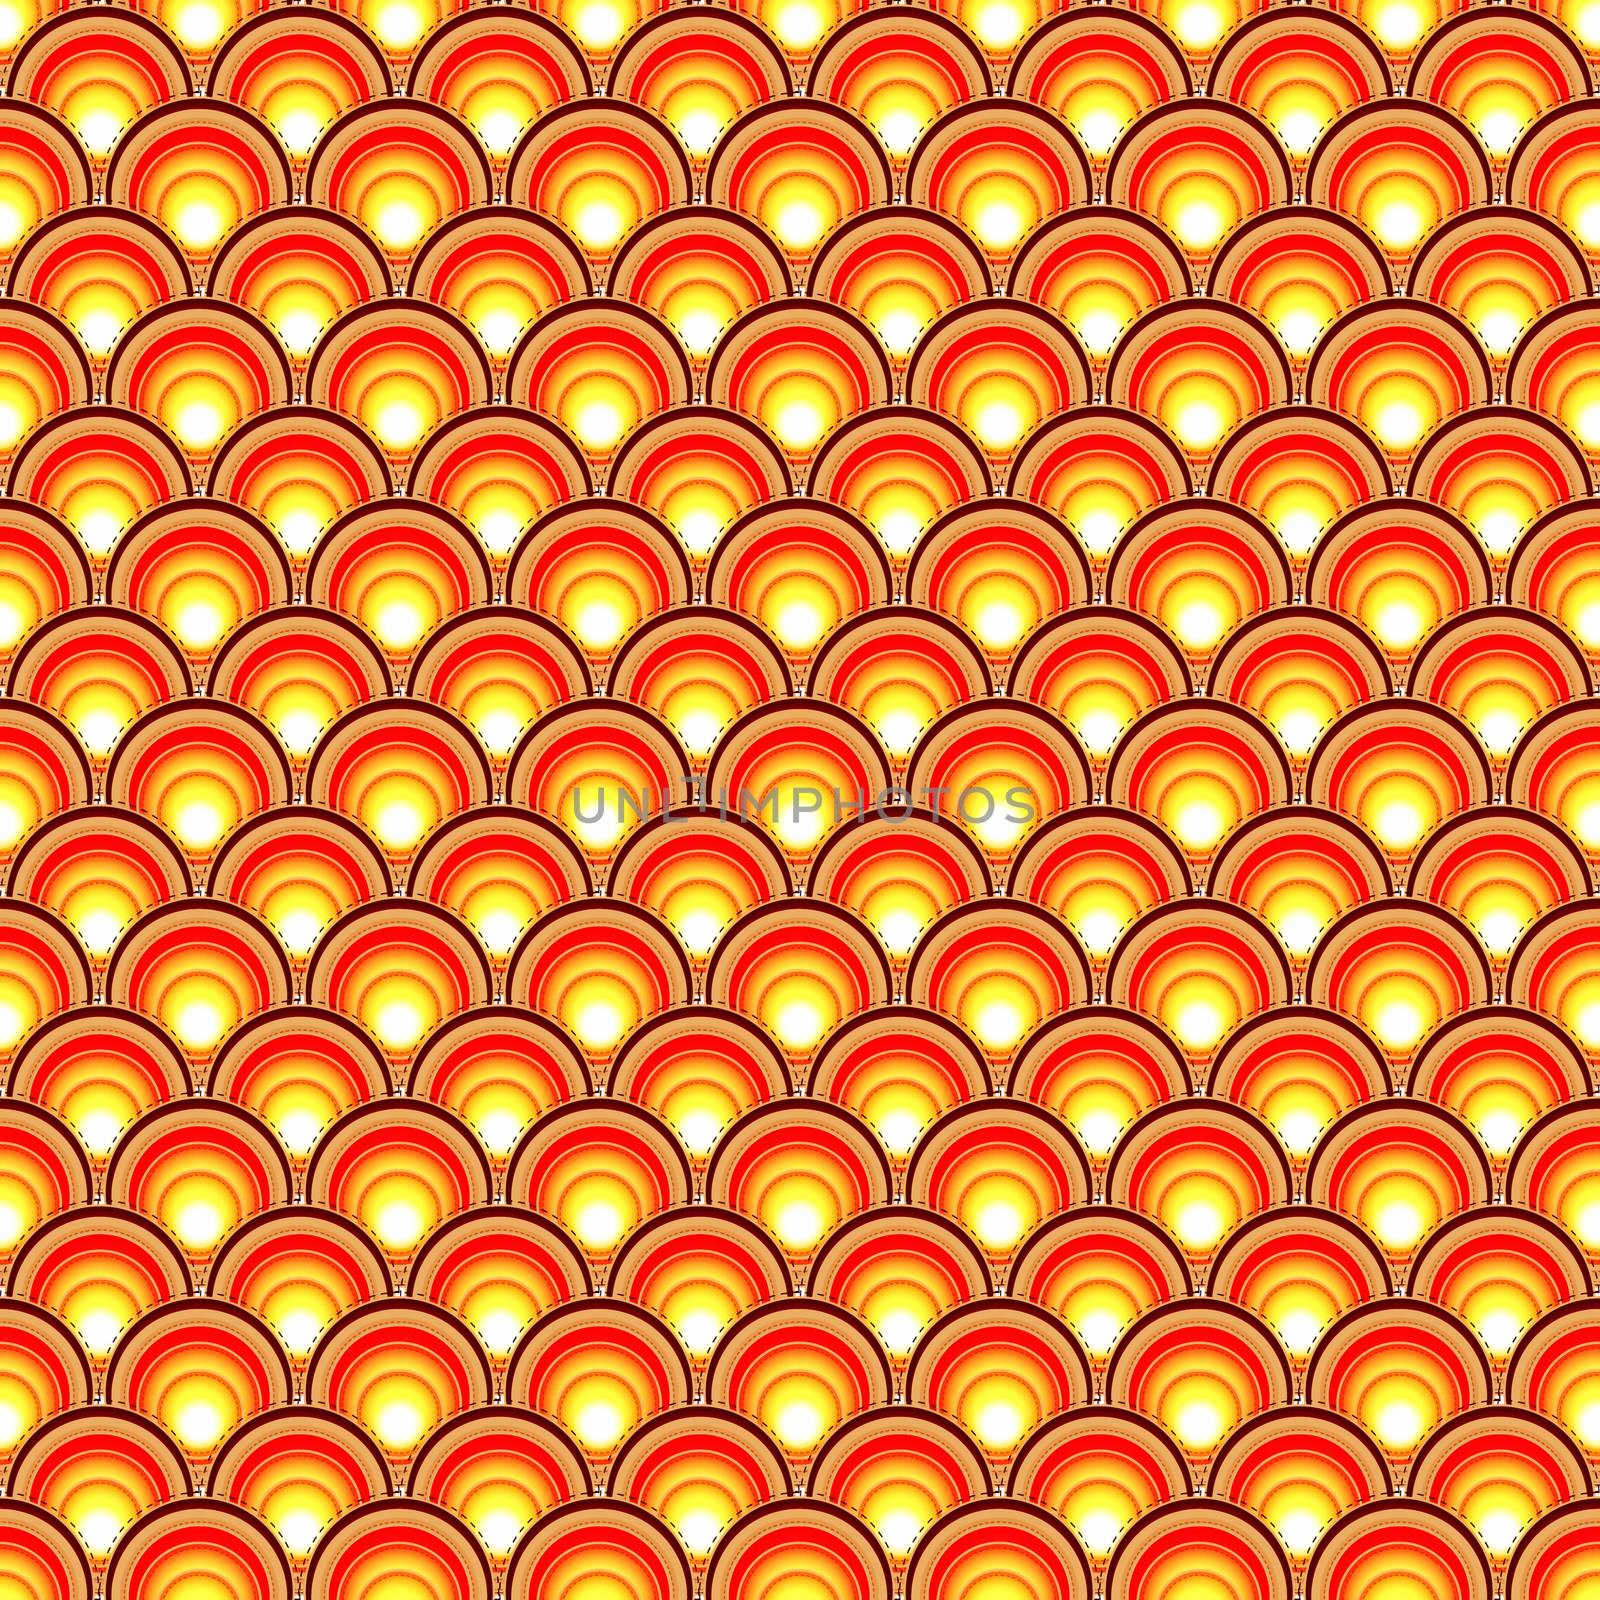 retro background with concentric brown, orange and yellow circles